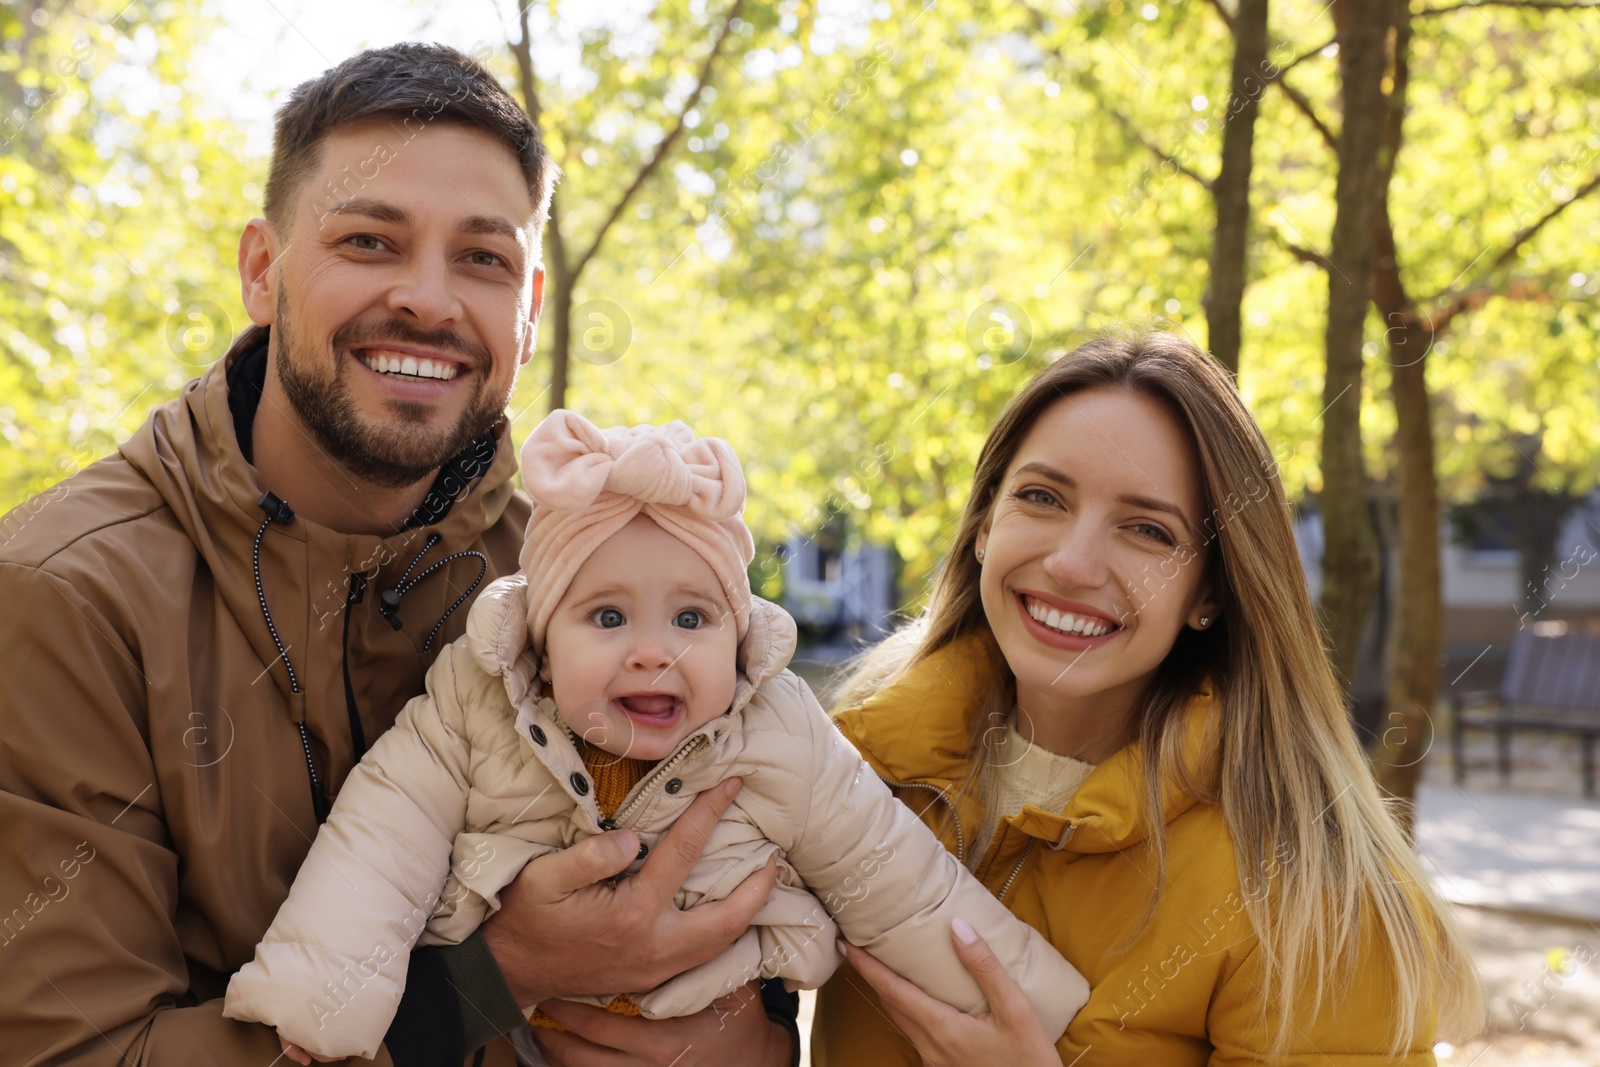 Photo of Happy parents with their baby in park on sunny day